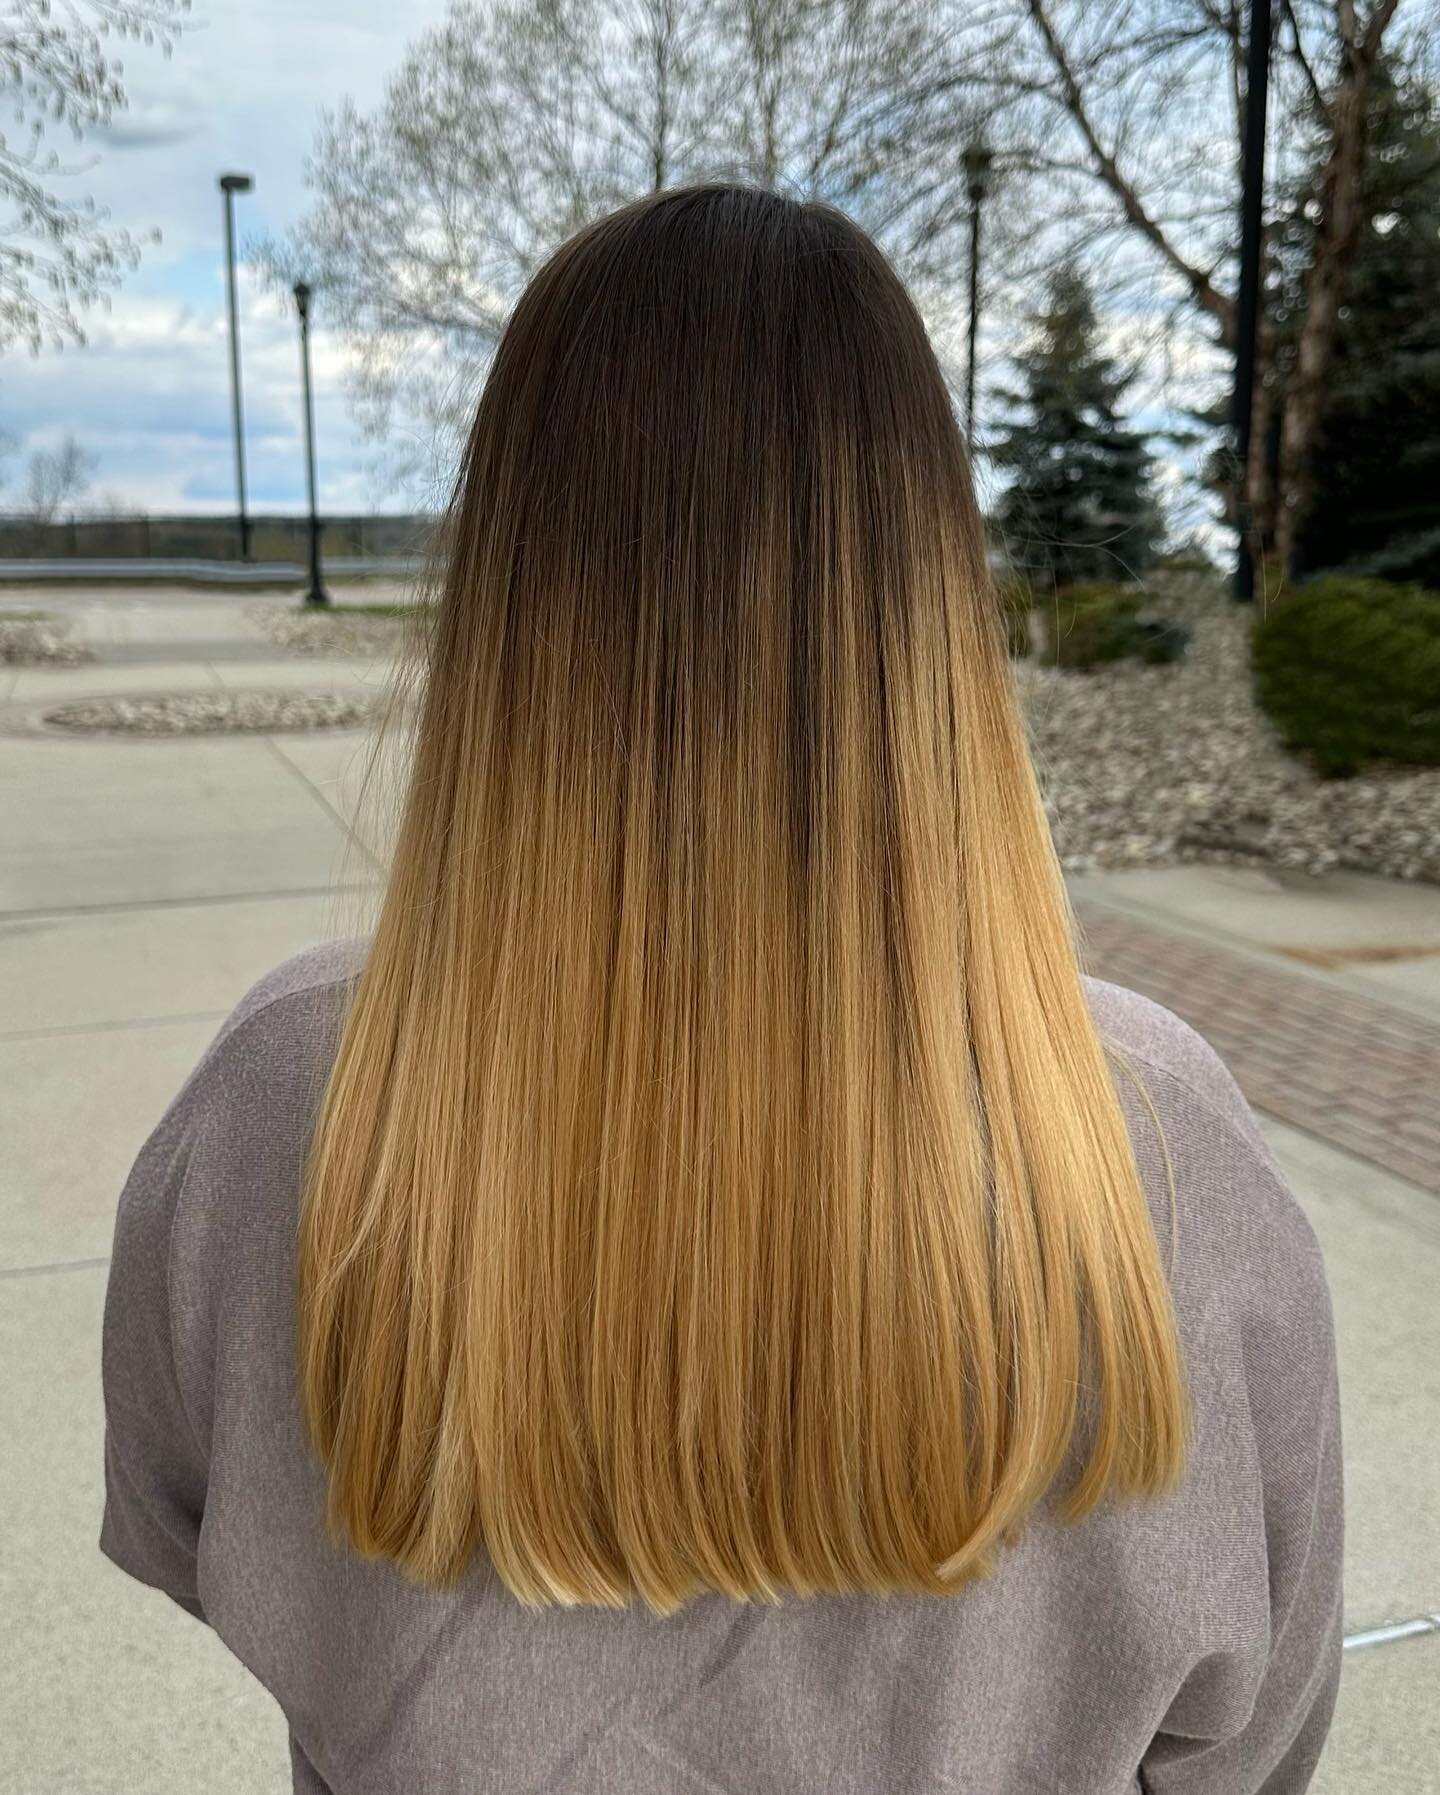 This client got the big chop to prepare for summer! (swipe for the before) We&rsquo;re obsessed with how much healthier and fuller her hair looks now. Shoutout to @katiehartwick for perfecting this transformation, and thank you to Kylie for visiting 